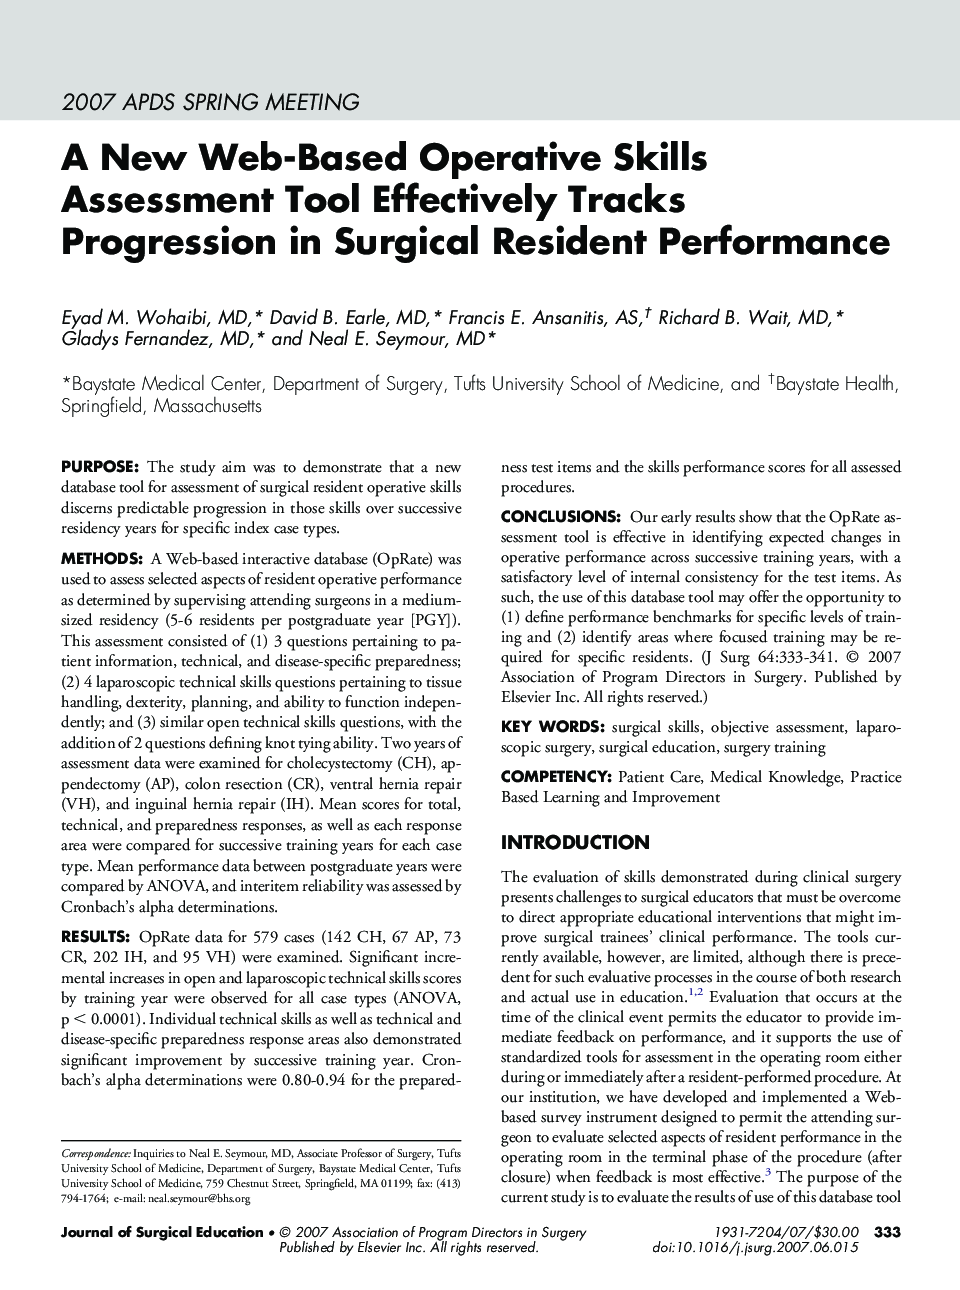 A New Web-Based Operative Skills Assessment Tool Effectively Tracks Progression in Surgical Resident Performance